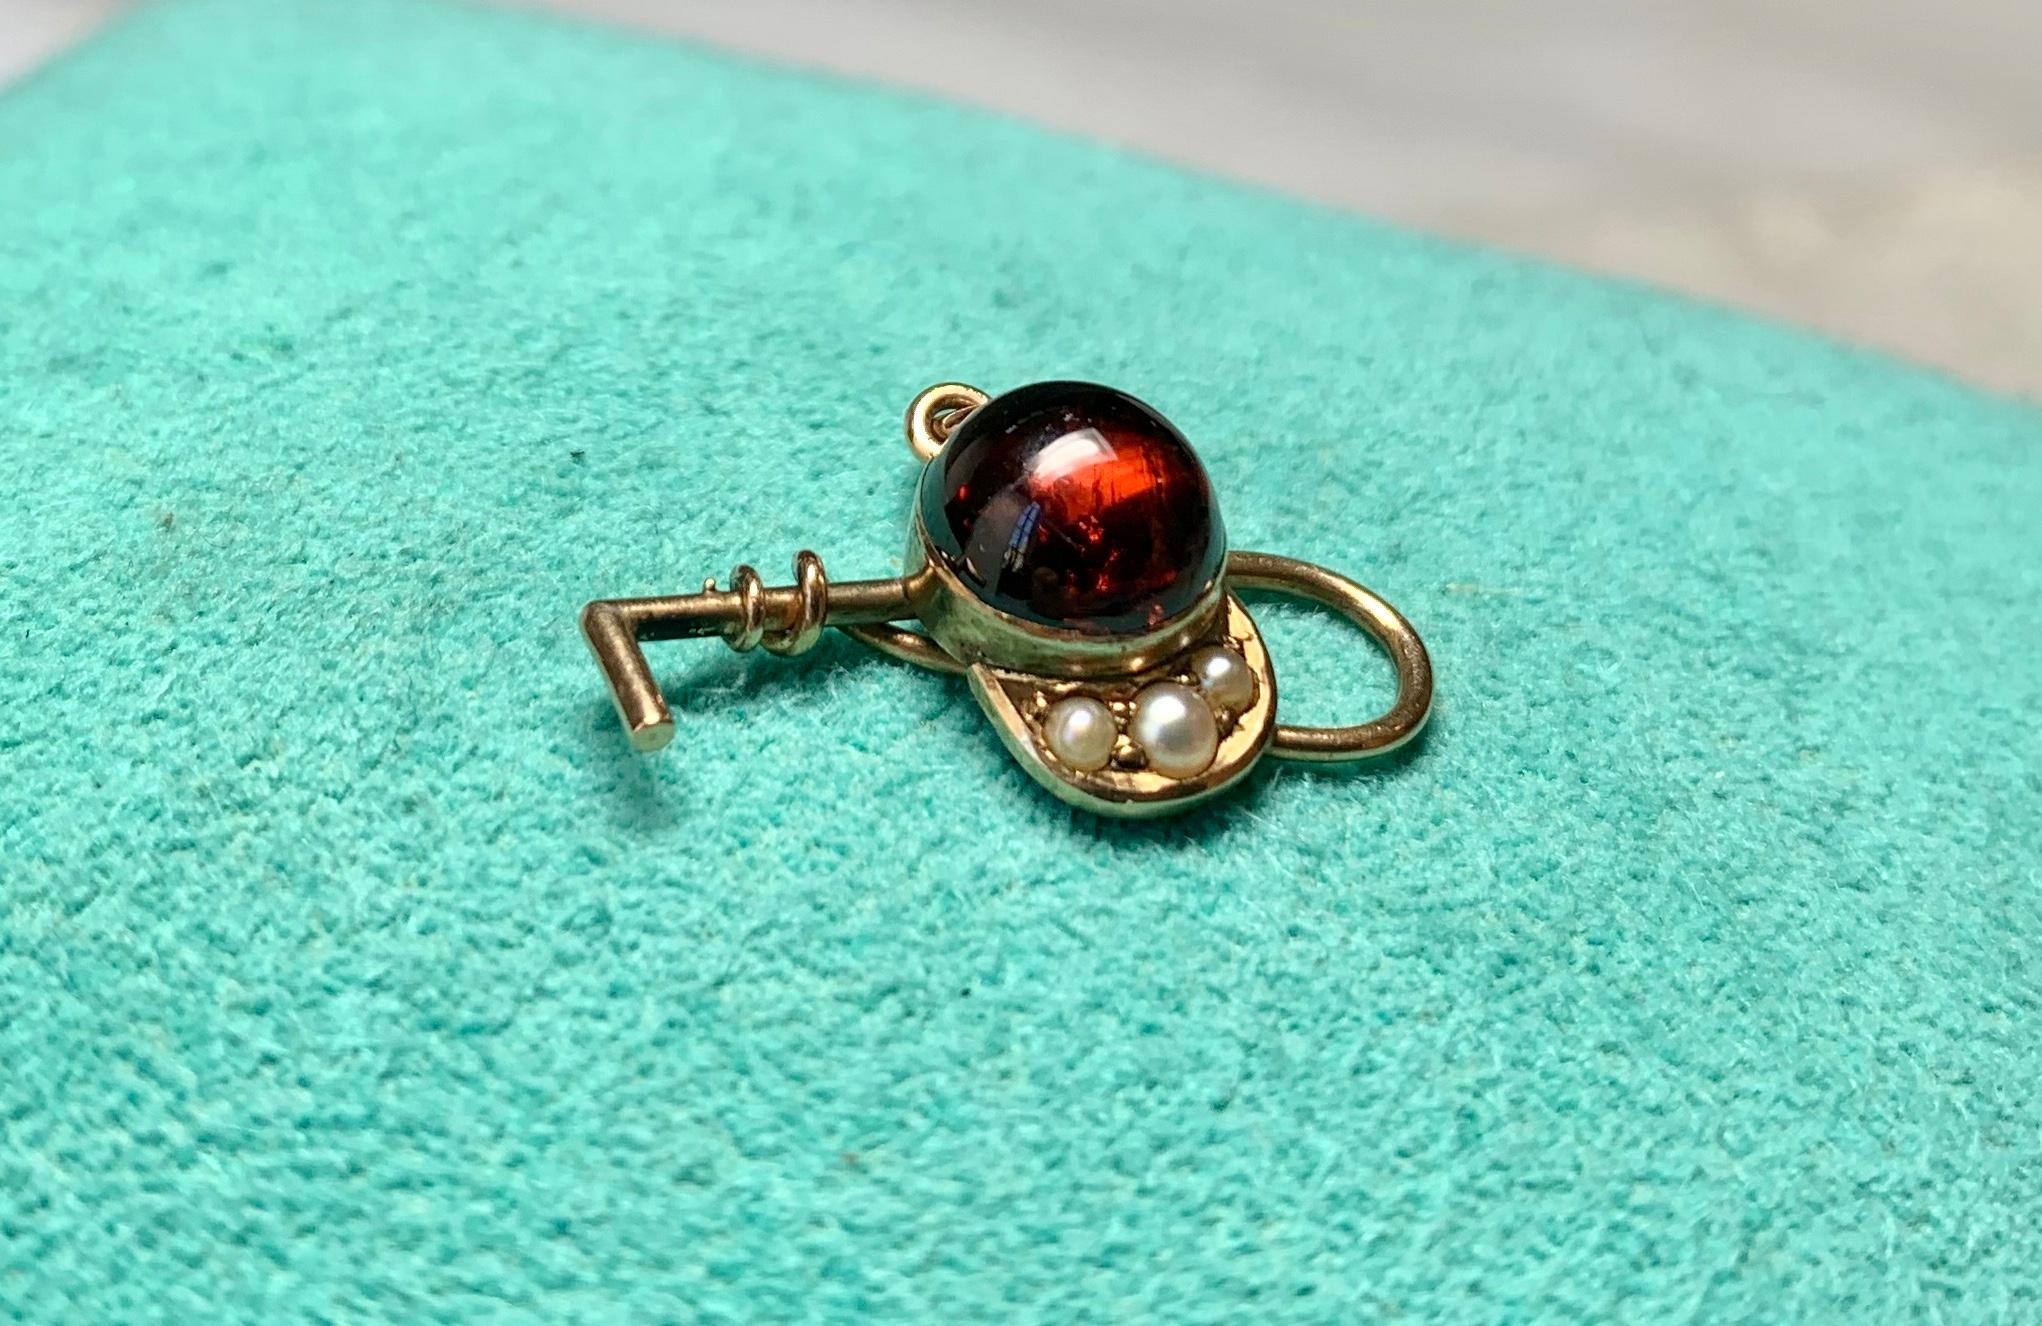 THIS IS A WONDERFUL VICTORIAN - EDWARDIAN PENDANT OR CHARM IN THE FORM OF A RIDING HAT SET WITH A STUNNING ROUND NATURAL GARNET CABOCHON AND PEARLS, WITH A RIDING CROP!  THE PENDANT IN 14K GOLD DATING TO C1900.
What a wonderful piece for